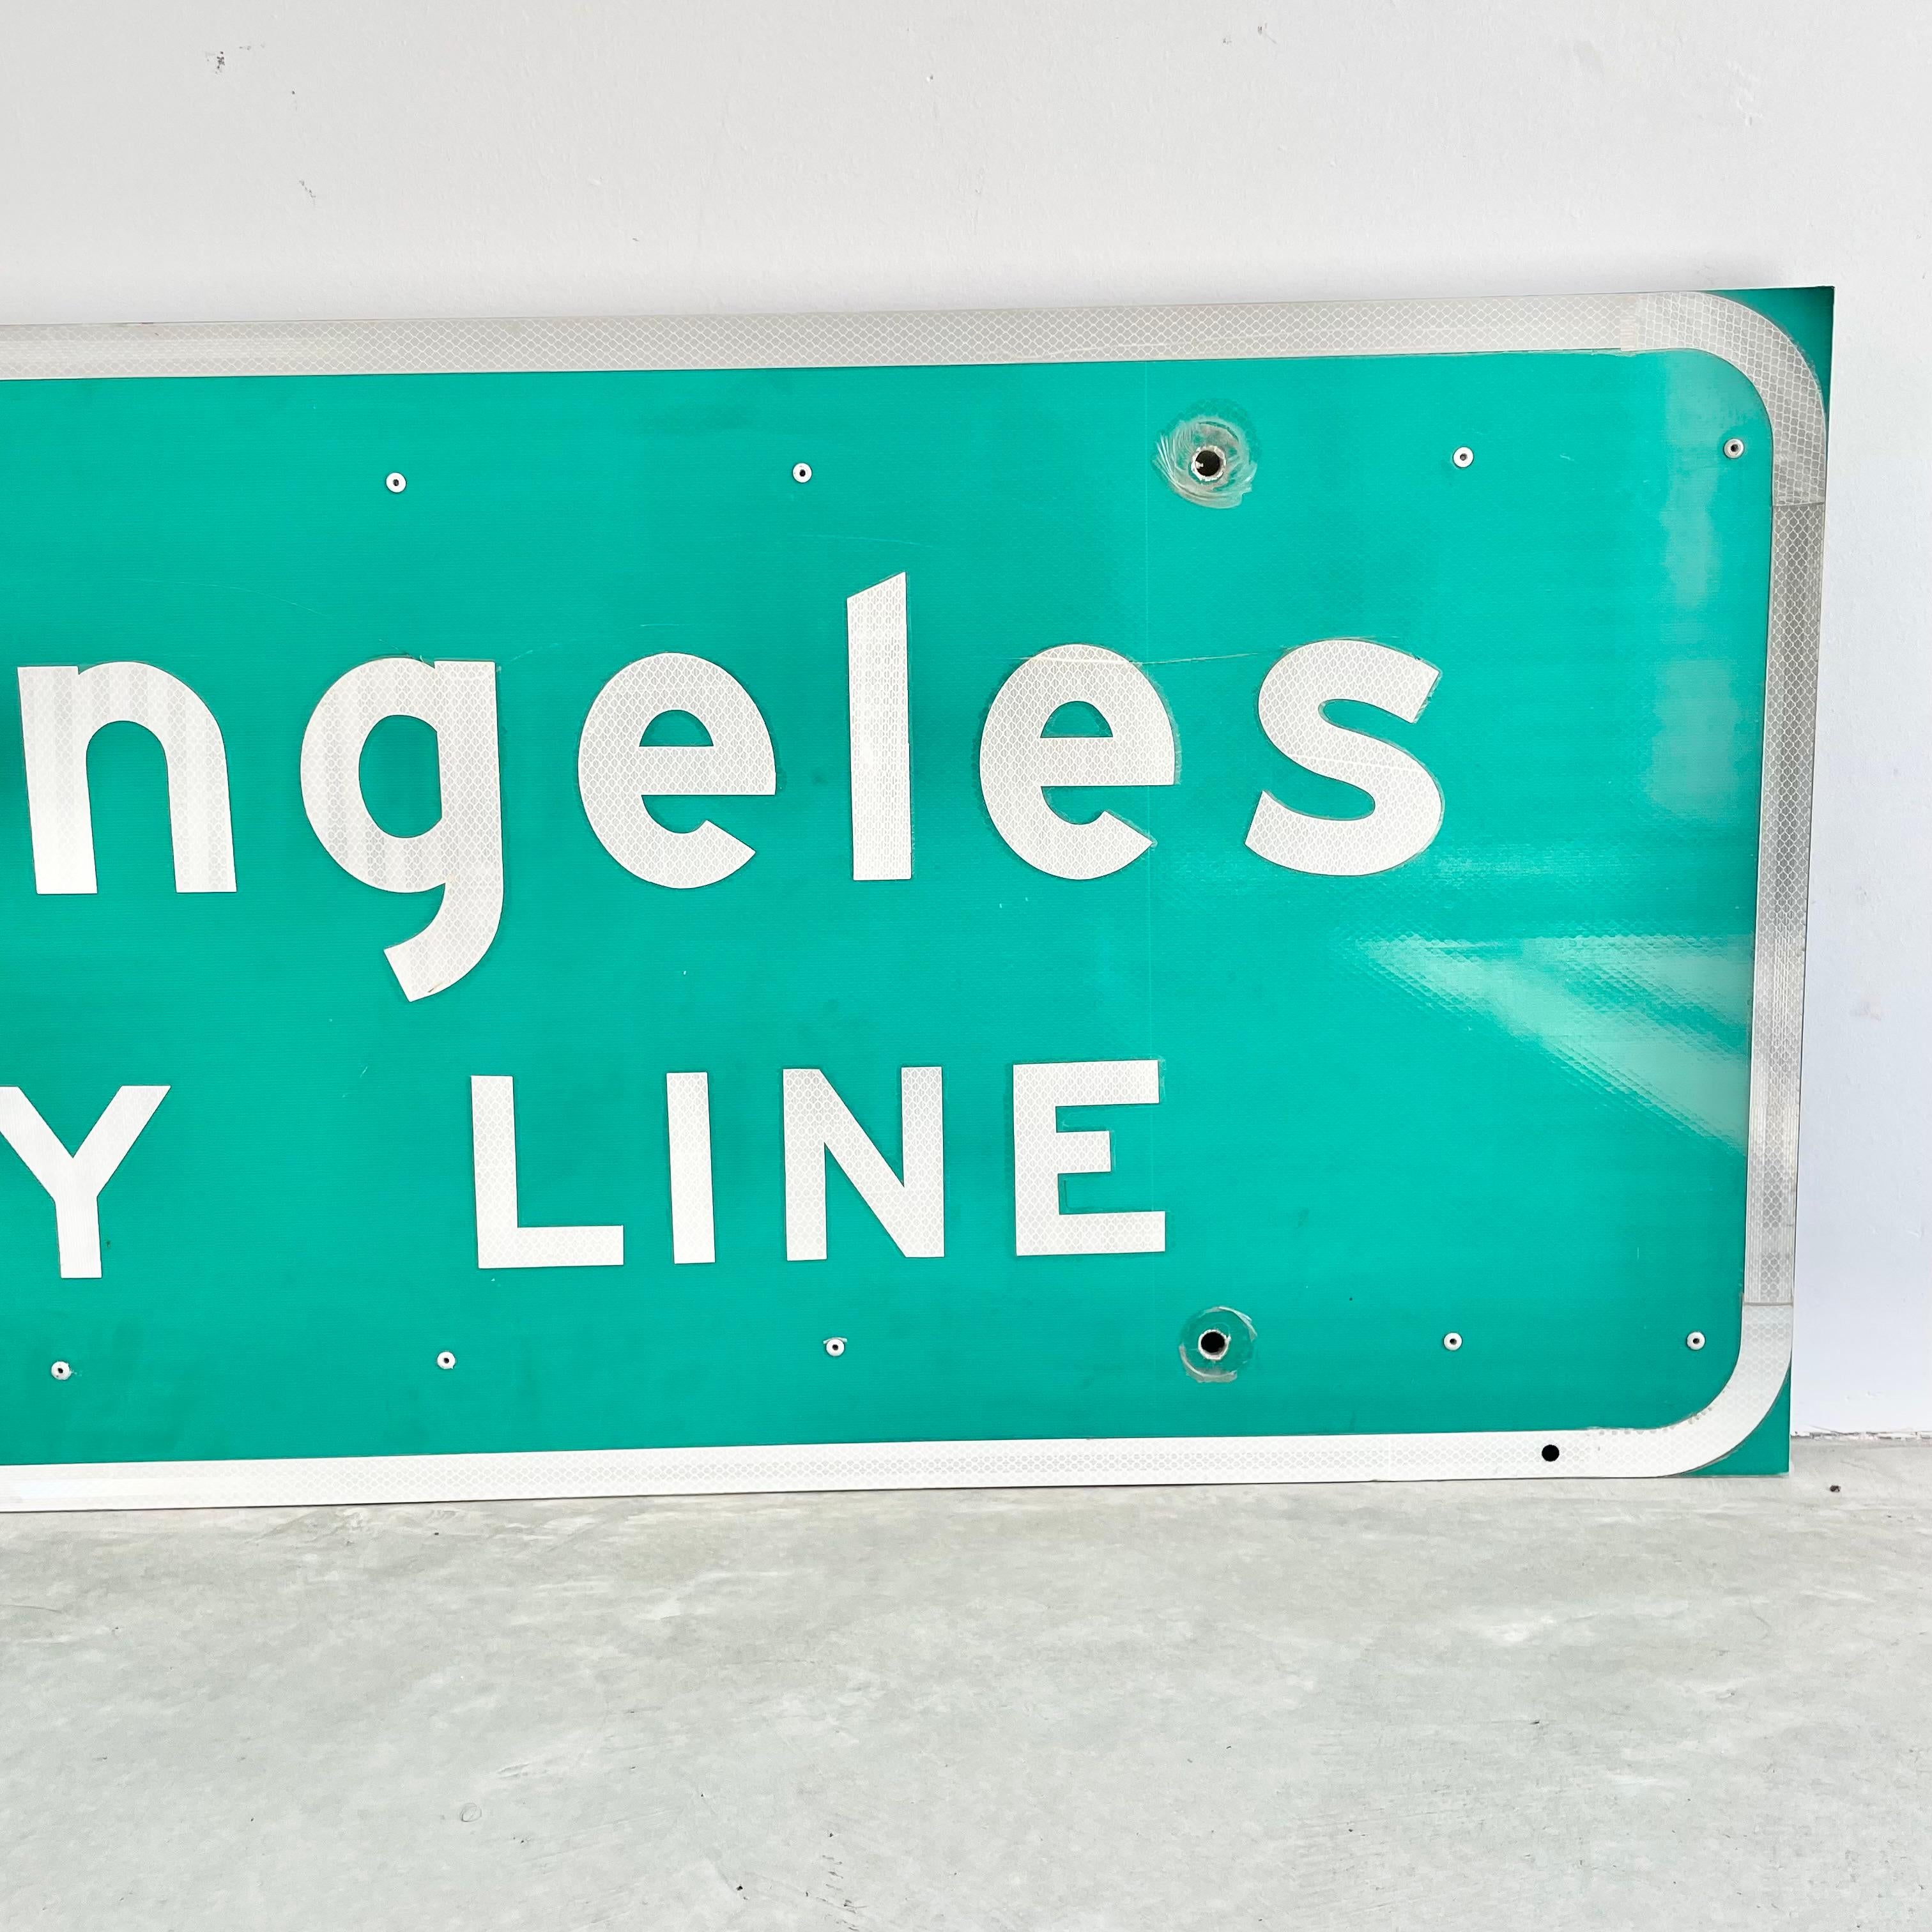 Aluminum Los Angeles County Line Freeway Sign, 1990s USA For Sale